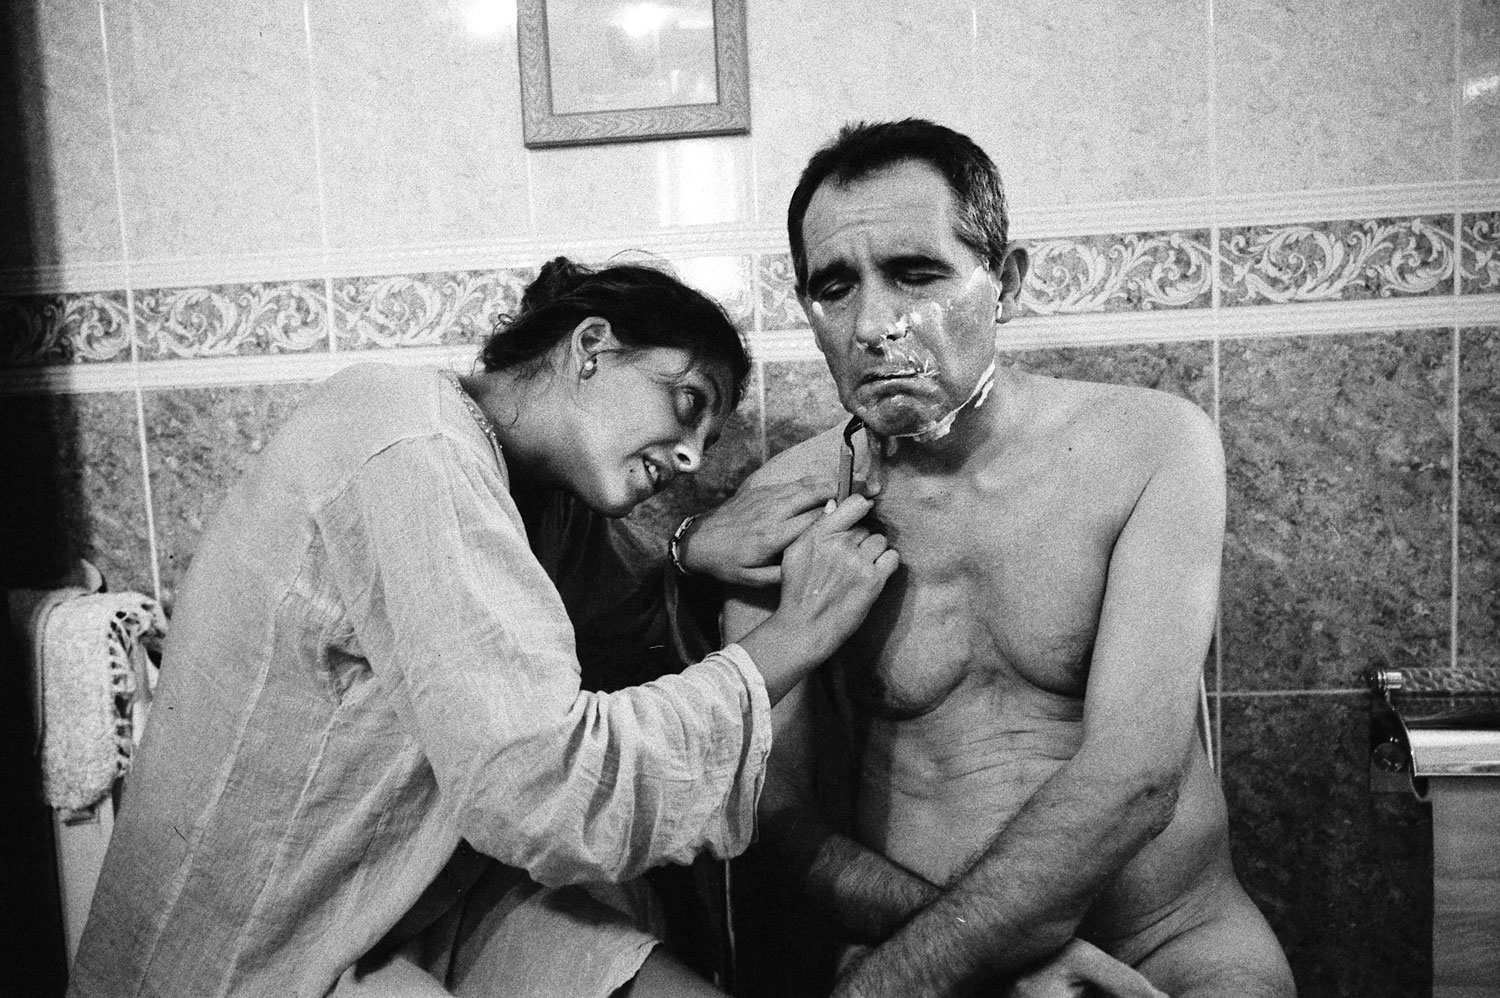 Cristina shaves her father’s face.